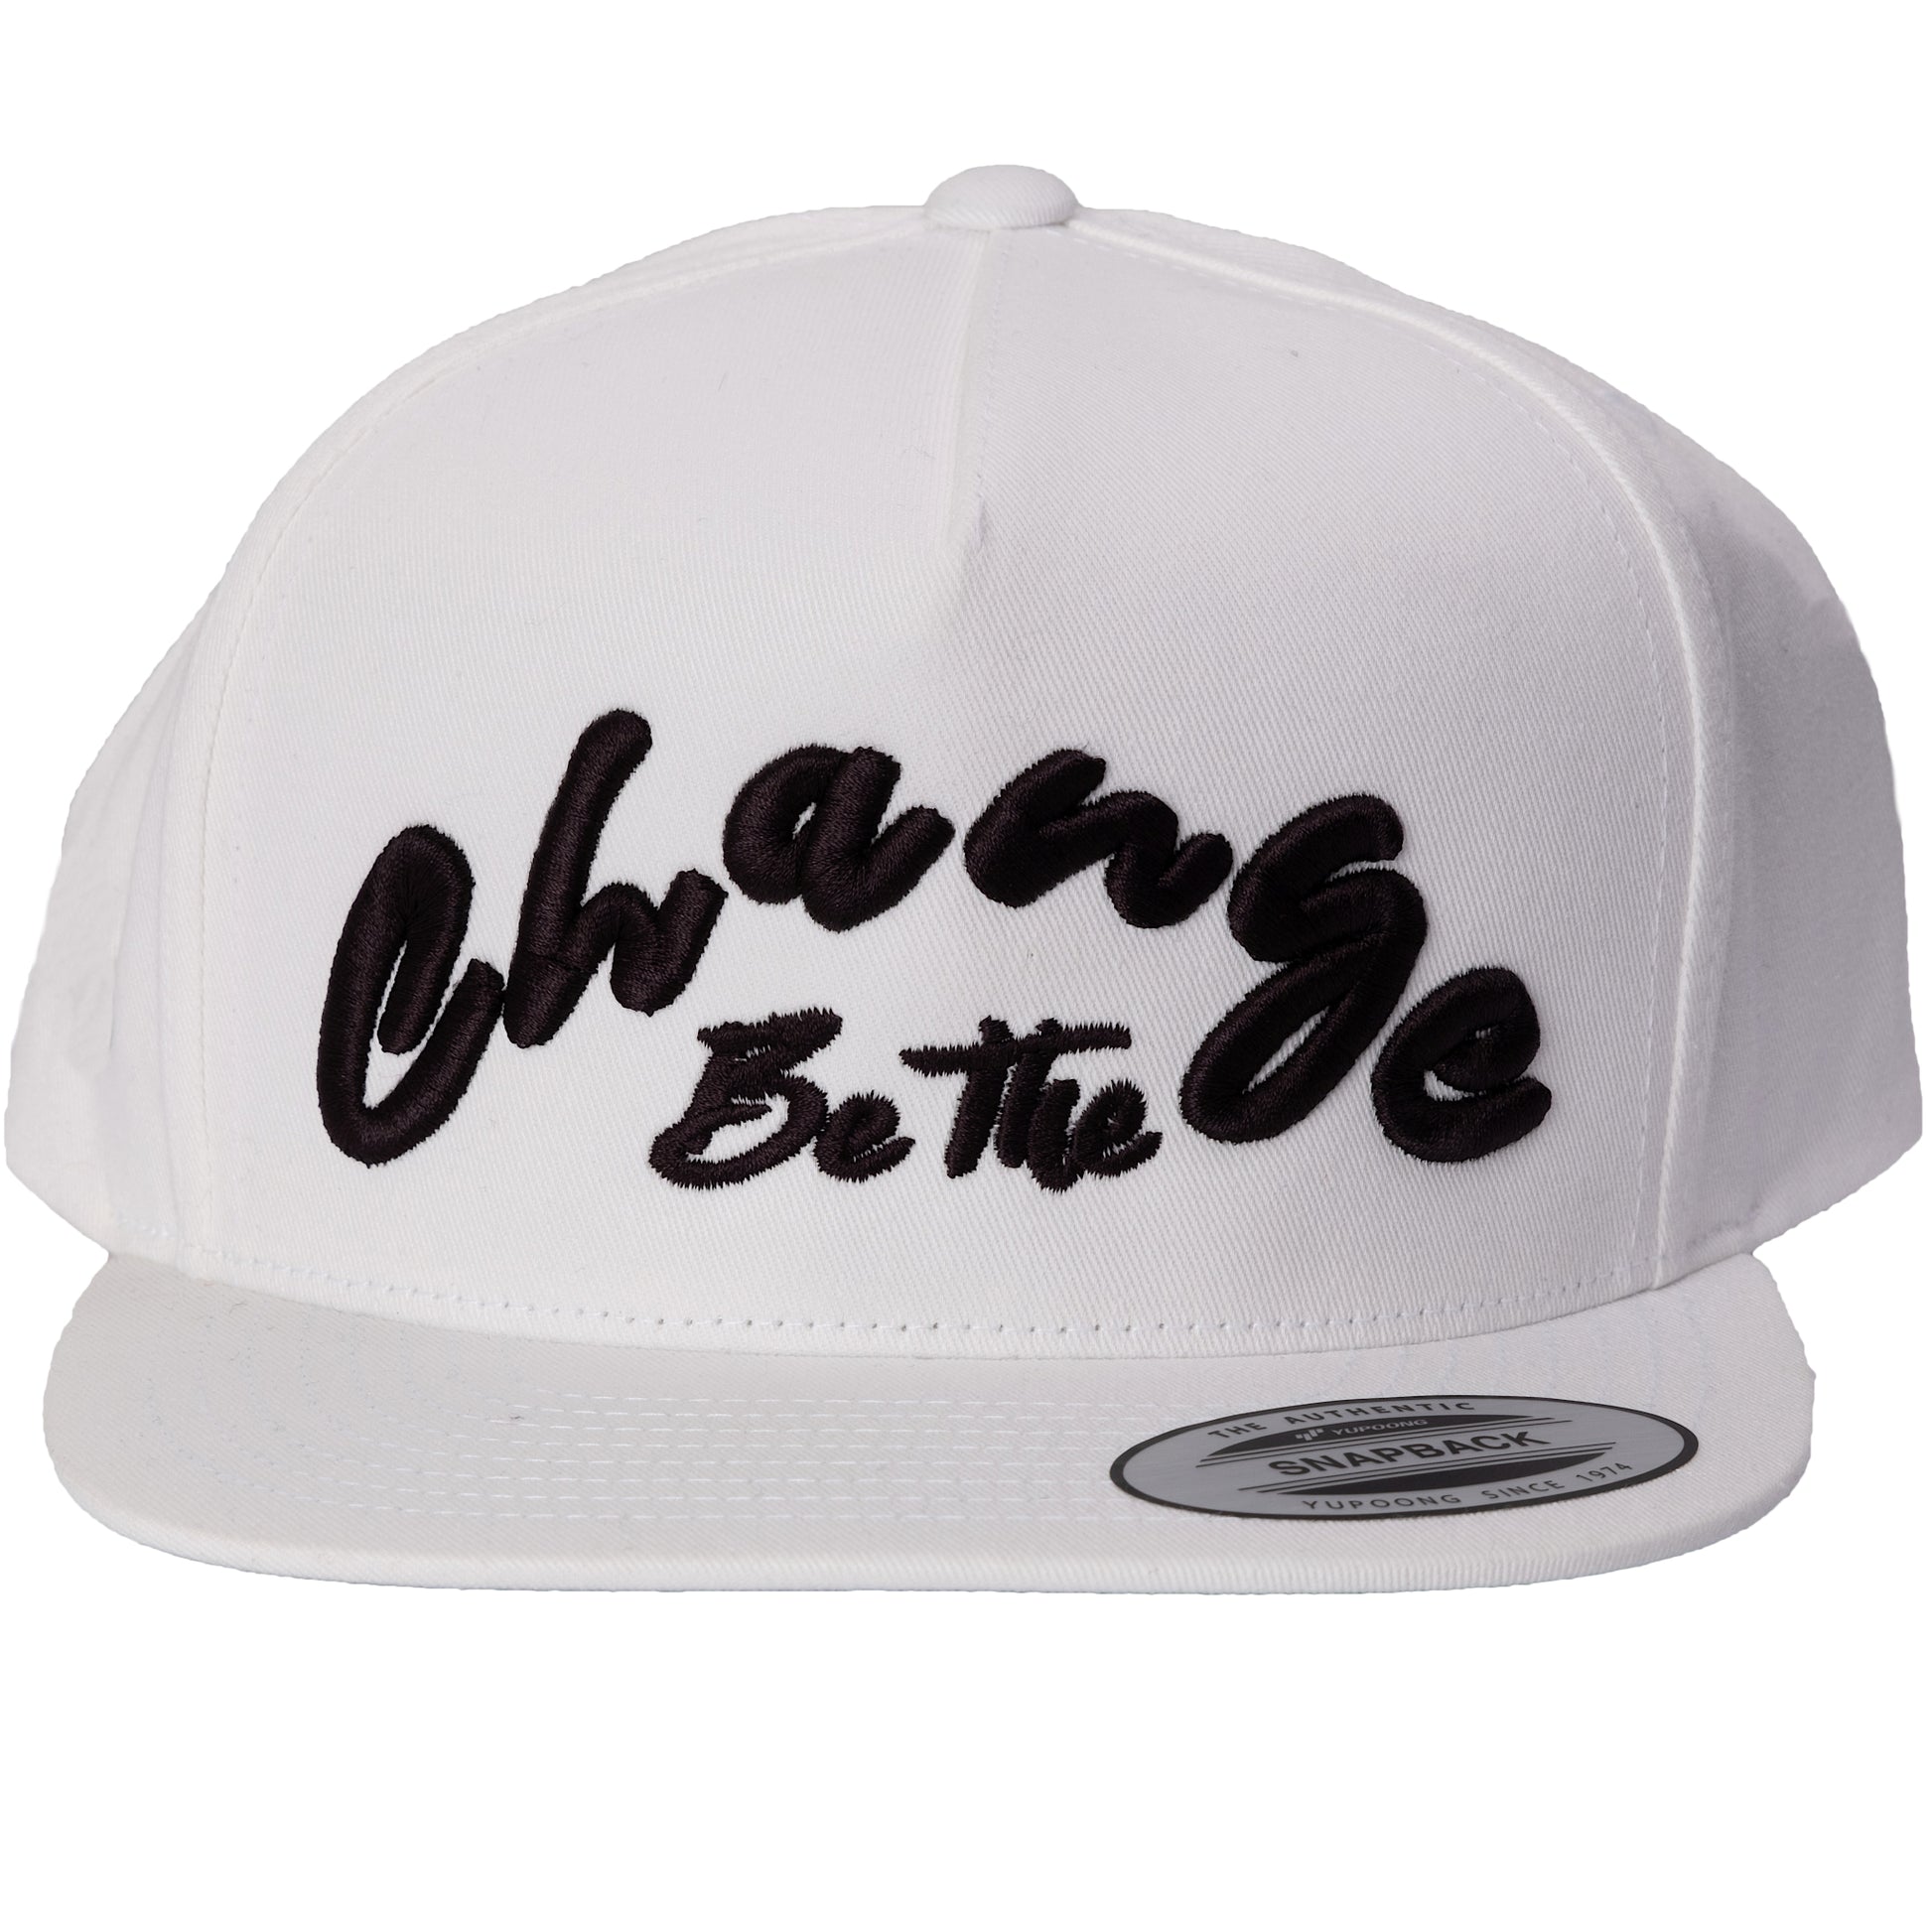 Back Cap " Be The Change